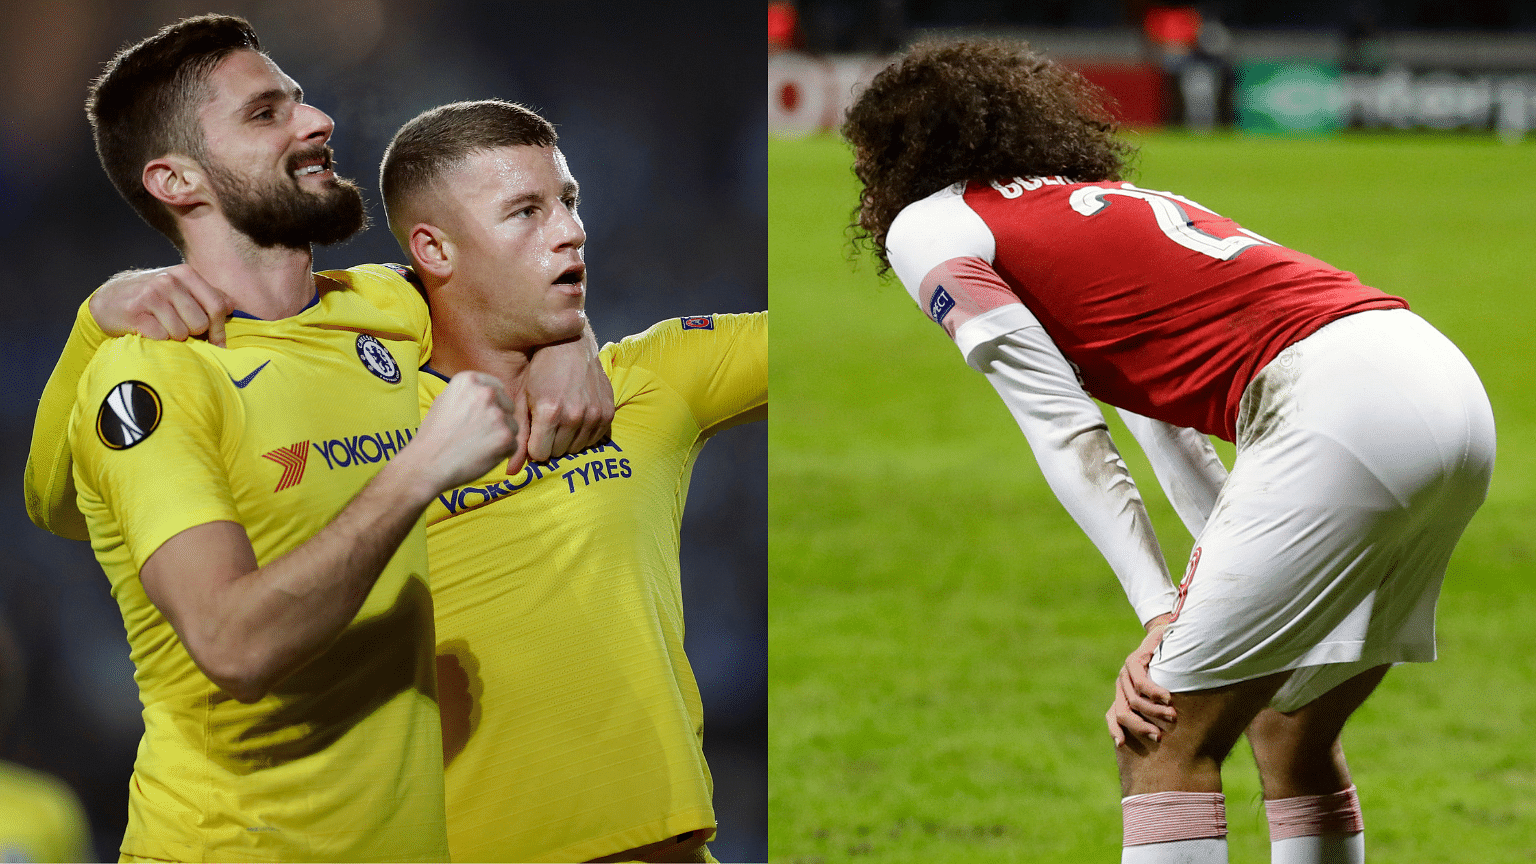 Chelsea claimed a 2-1 victory at Malmo (left) while Arsenal go down 0-1 to BATE.